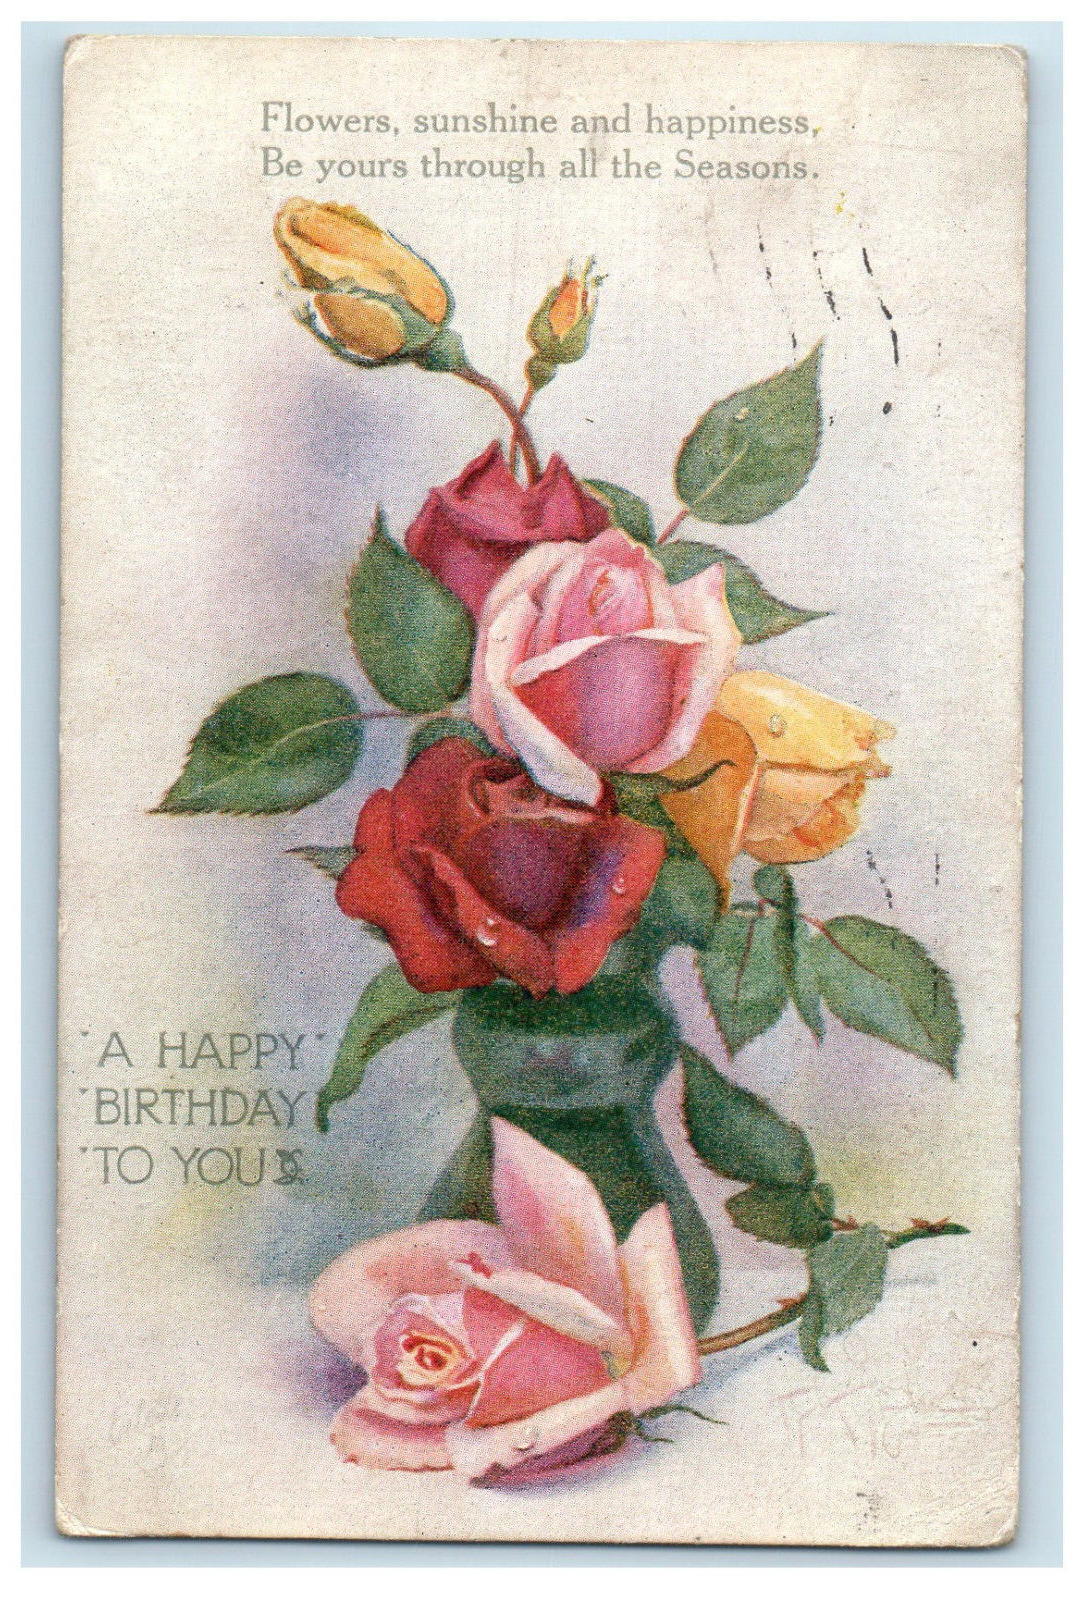 1921 A Happy Birthday To You, Flowers, Oilette Tuck Art Posted Postcard